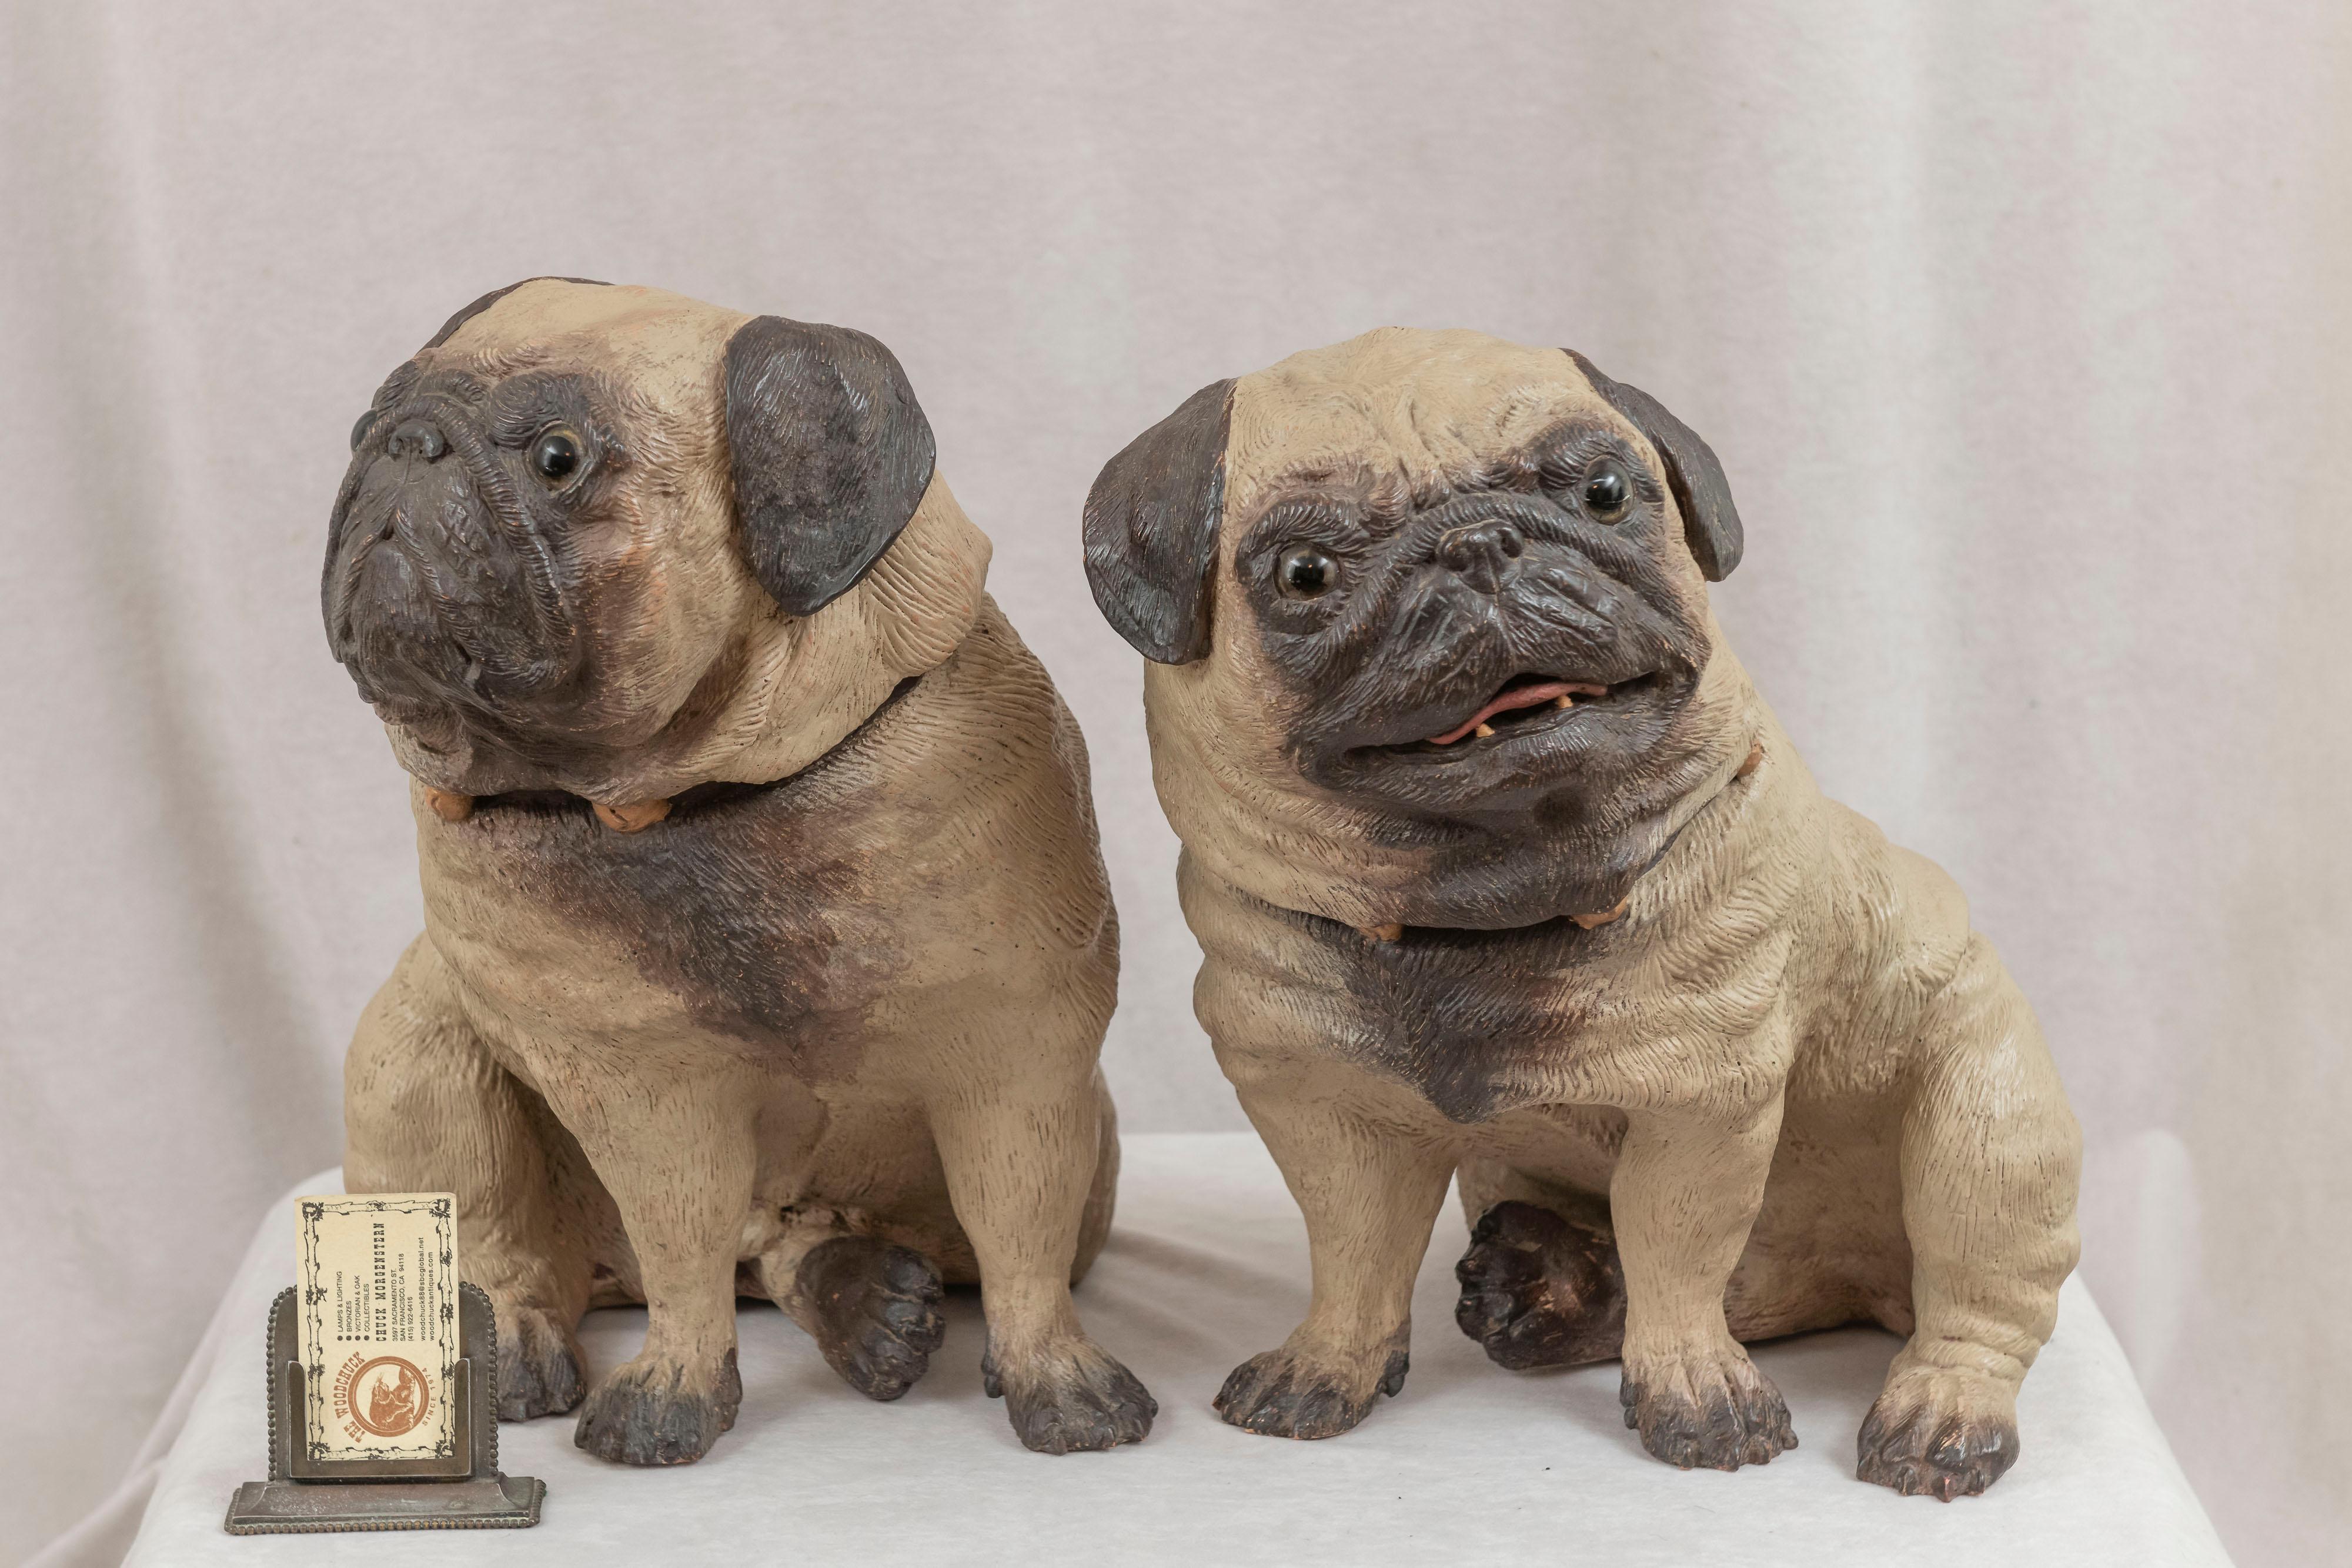 This amazing pair of life sized pugs are realistic and beautiful. We feel they are as good as one could hope for in a sculpture of this breed. They were meticulously detailed to look life- like. They were hand painted with the appropriate colors and